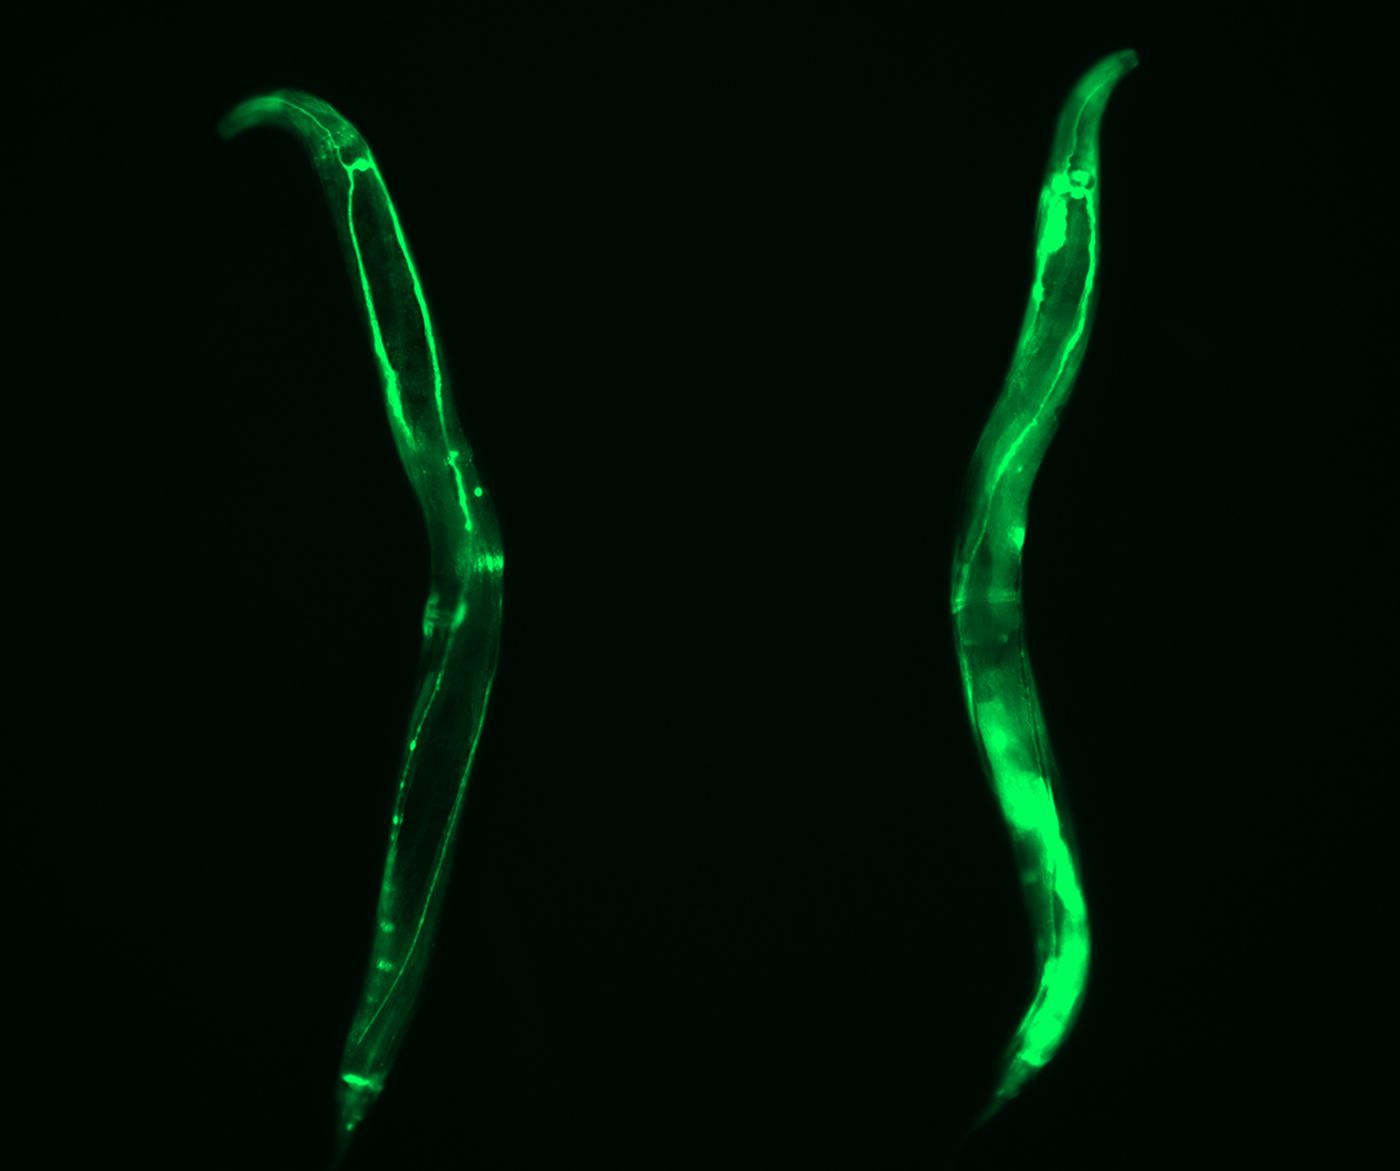 Long-lived germline-lacking C. elegans exhibit up-regulation of CCT expression in somatic tissues. Representative image of GFP expressed under control of the cct-8 promoter in adult wild-type and germline-lacking (glp-1(e2141)) worms. DAPI. / Credit: Alireza Noormohammadi and Amirabbas Khodakarami 